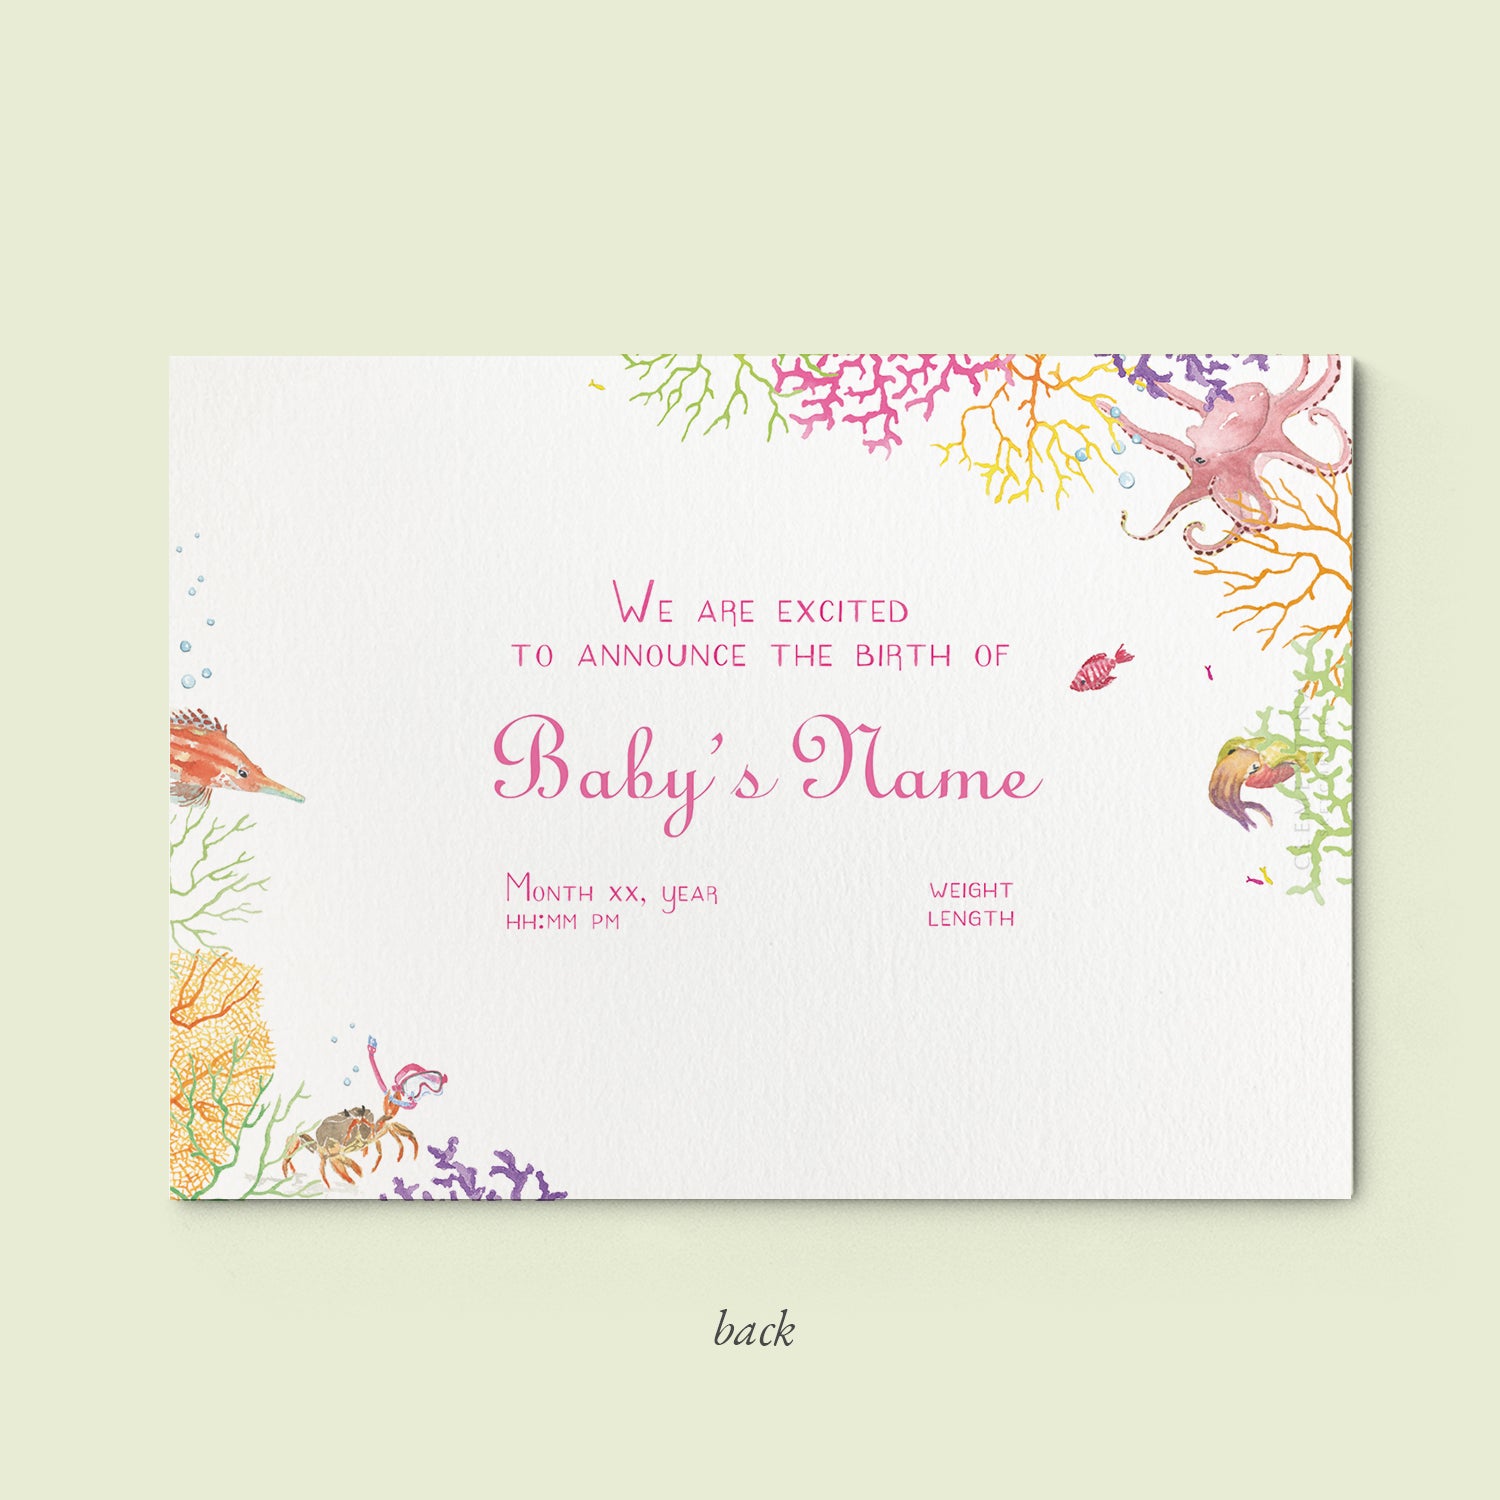 Coral Reef Printed Birth Announcements - With Photo - 04